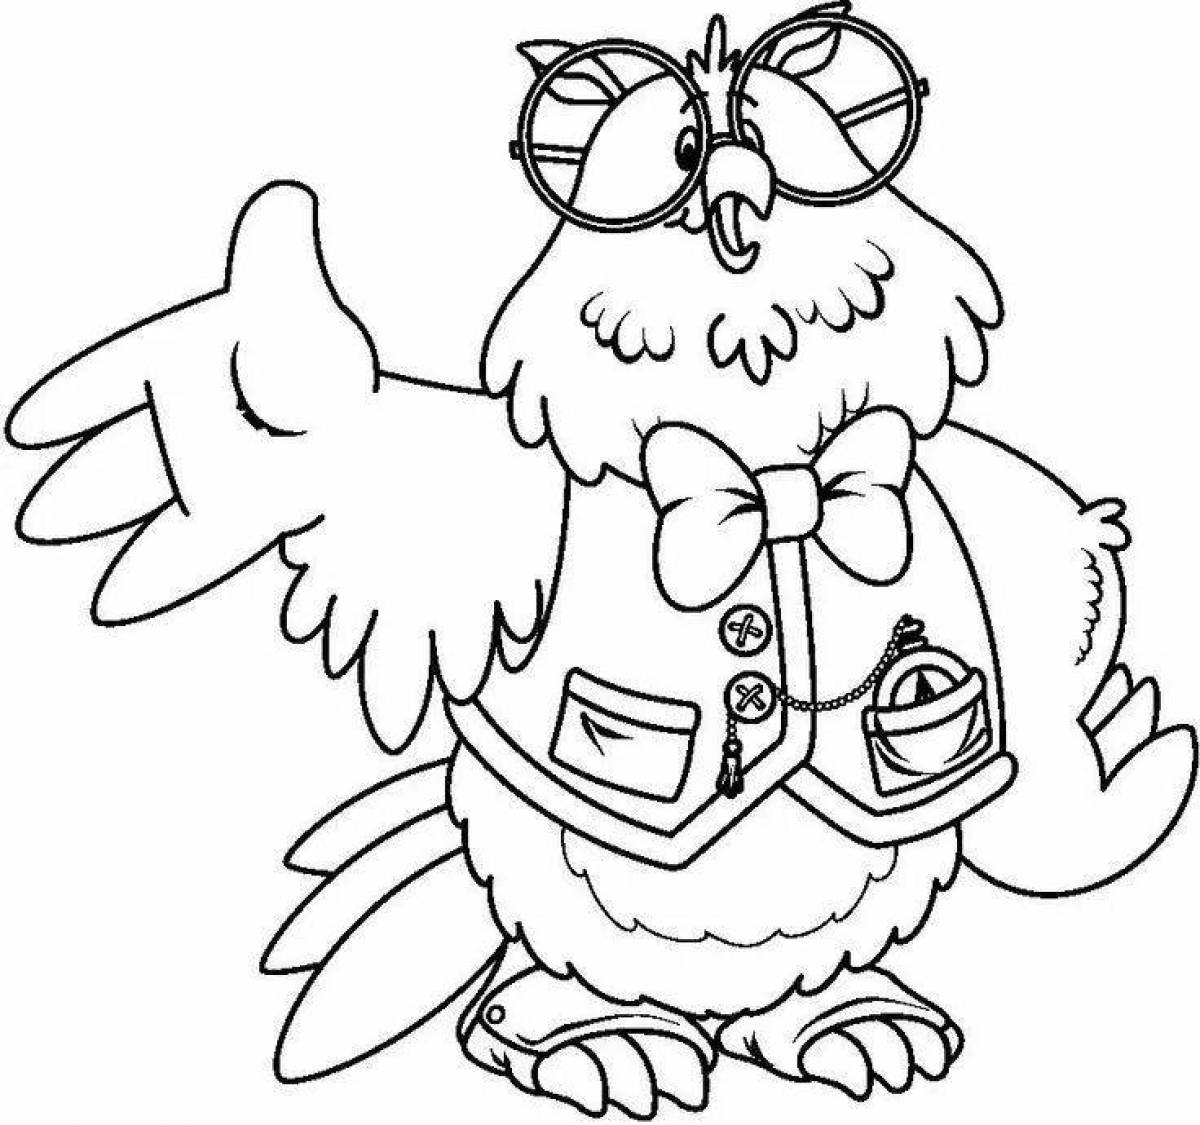 Wise owl coloring page with scroll